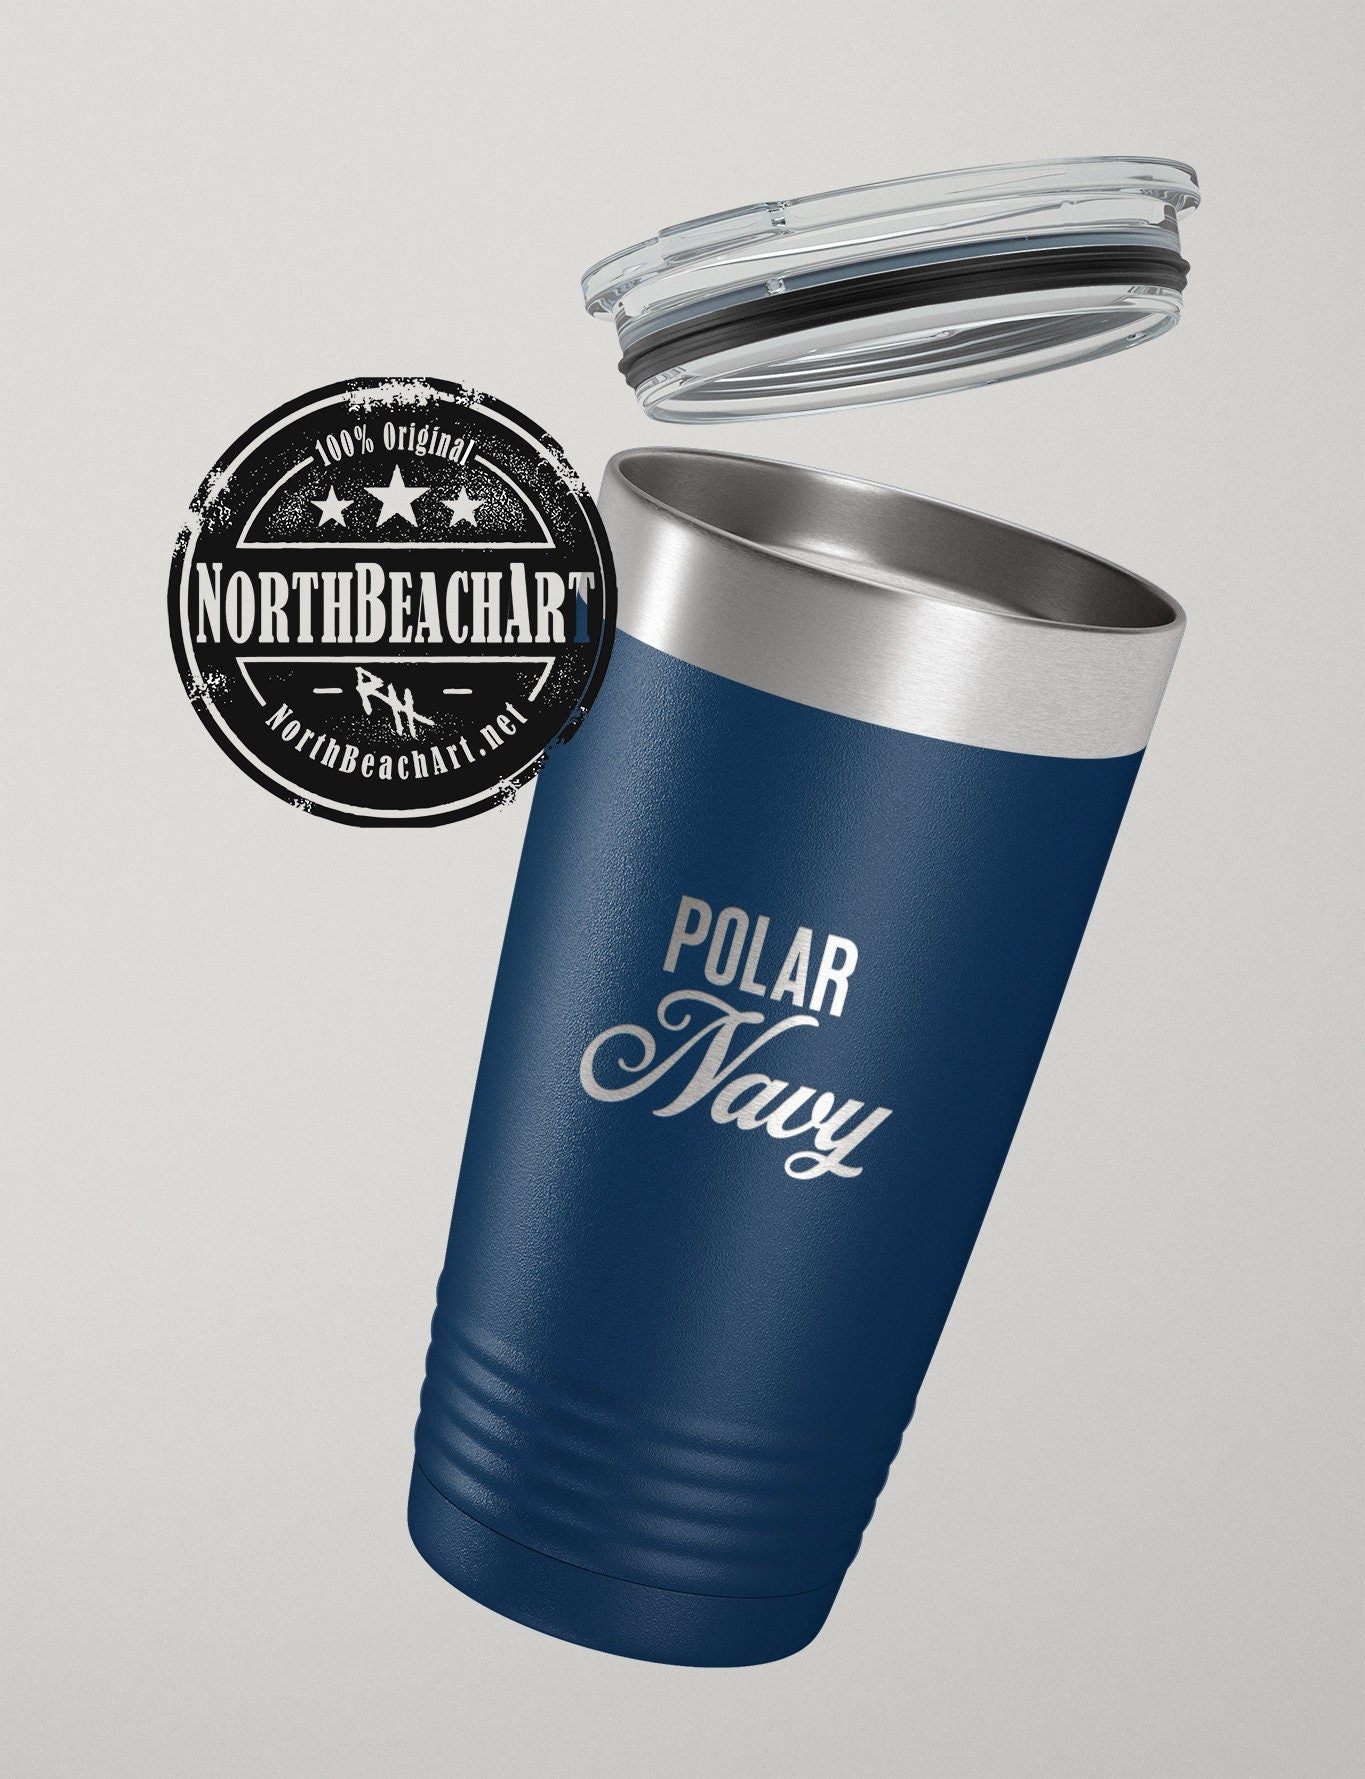 Bride and Groom Personalized Yeti® or Polar Tumbler, Mr and Mrs